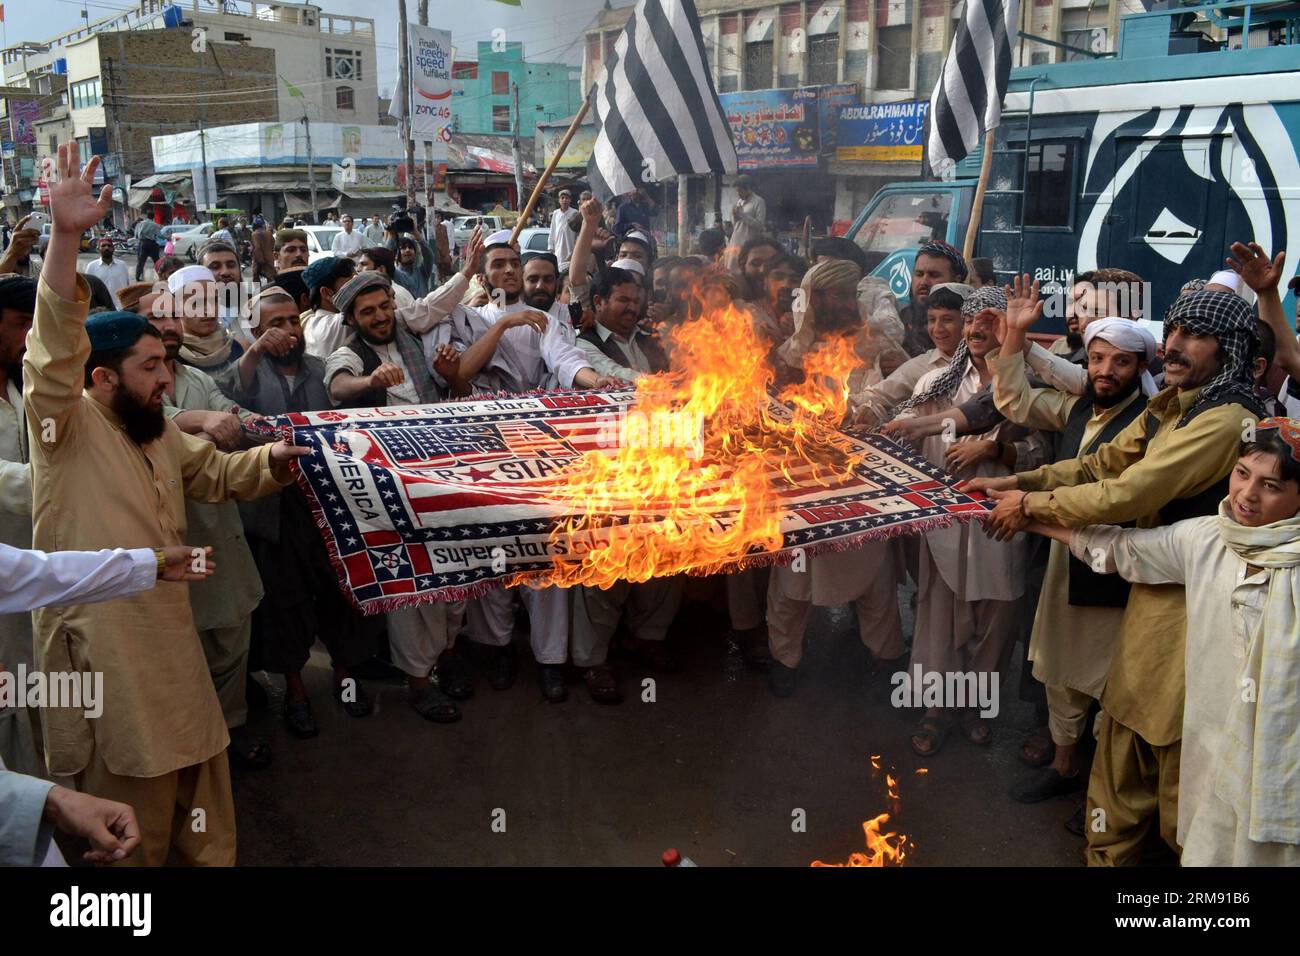 Pakistani protester burn a US flag as they shout slogans during a protest on the third anniversary of the death of slain Al-Qaeda leader Osama bin Laden, in southwest Pakistan s Quetta on May 2, 2014. Osama bin Laden was killed by U.S. military force on May 2, 2011, in a fortress-like compound on the outskirts of Pakistani city of Abbottabad. (Xinhua/Asad) (WORLD SECTION) PAKISTAN-QUETTA-BIN LADEN-PROTEST PUBLICATIONxNOTxINxCHN   Pakistani  Burn a U.S. Flag As They Shout Slogans during a Protest ON The Third Anniversary of The Death of Slain Al Qaeda Leader Osama am shop in Southwest Pakistan Stock Photo